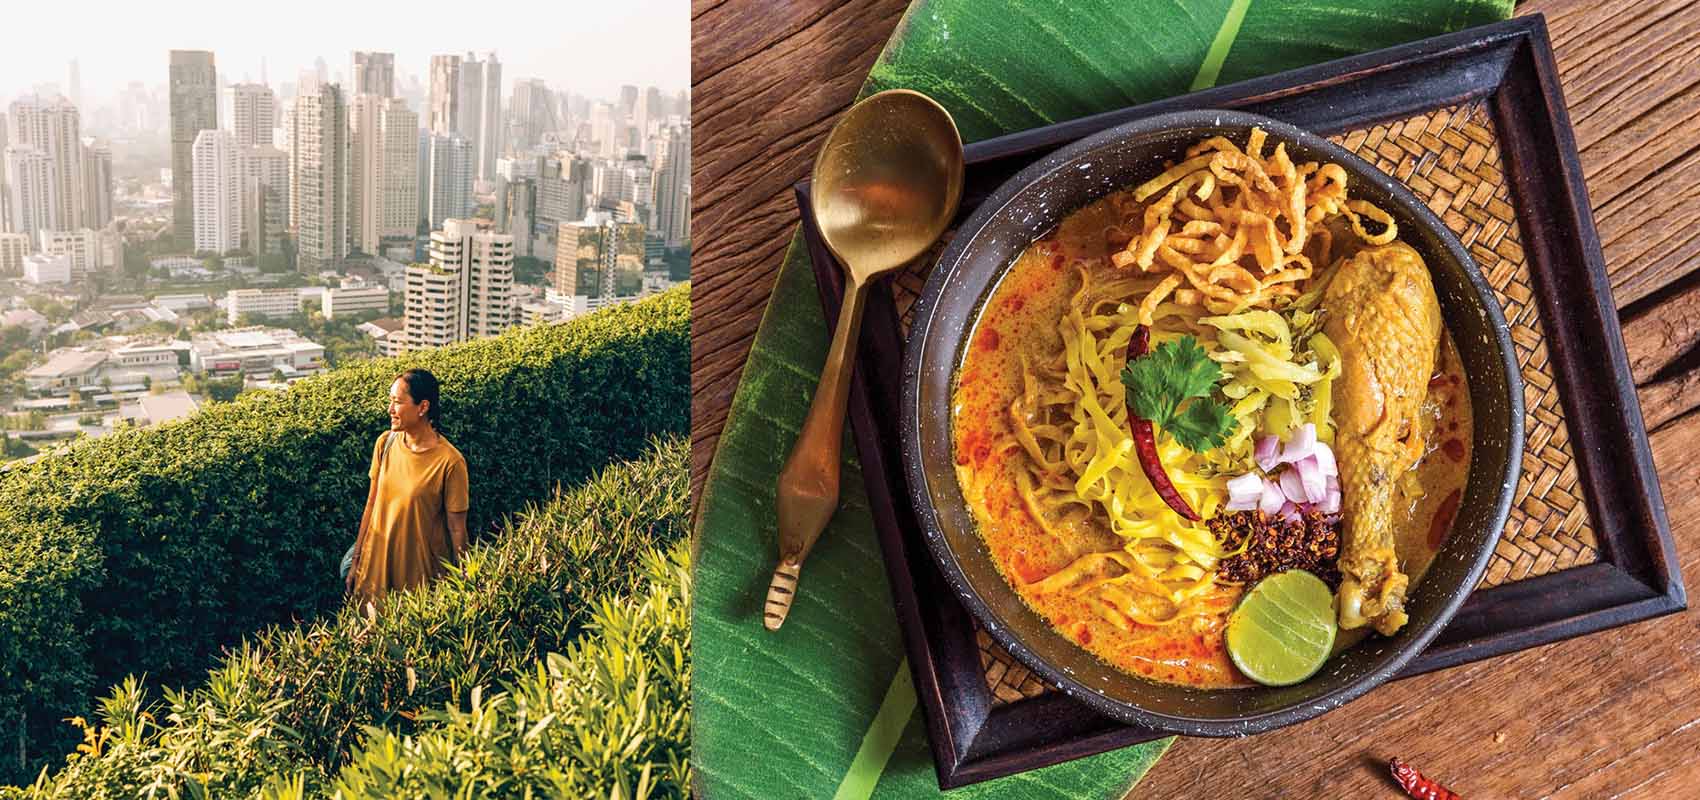 Left: A woman strolls in a park overlooking Bangkok; Right: The most recognized dish of the Chiang Mai area in northern Thailand is khao soi, a combination of soft and crisp noodles in a bowl of rich coconut curry.